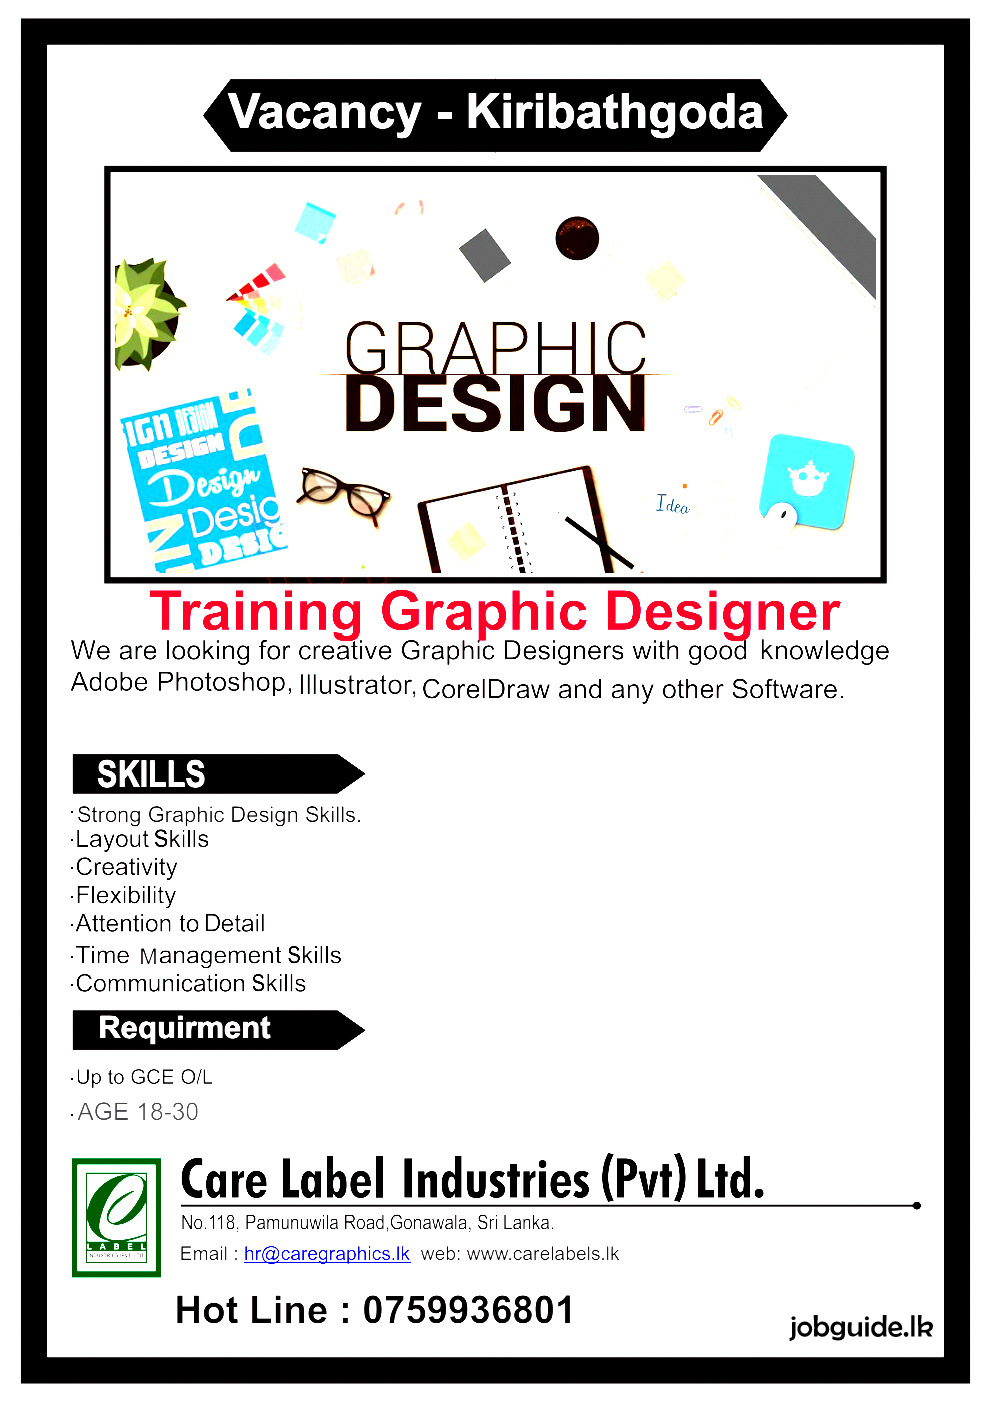 Jobs Available For Graphic Designers